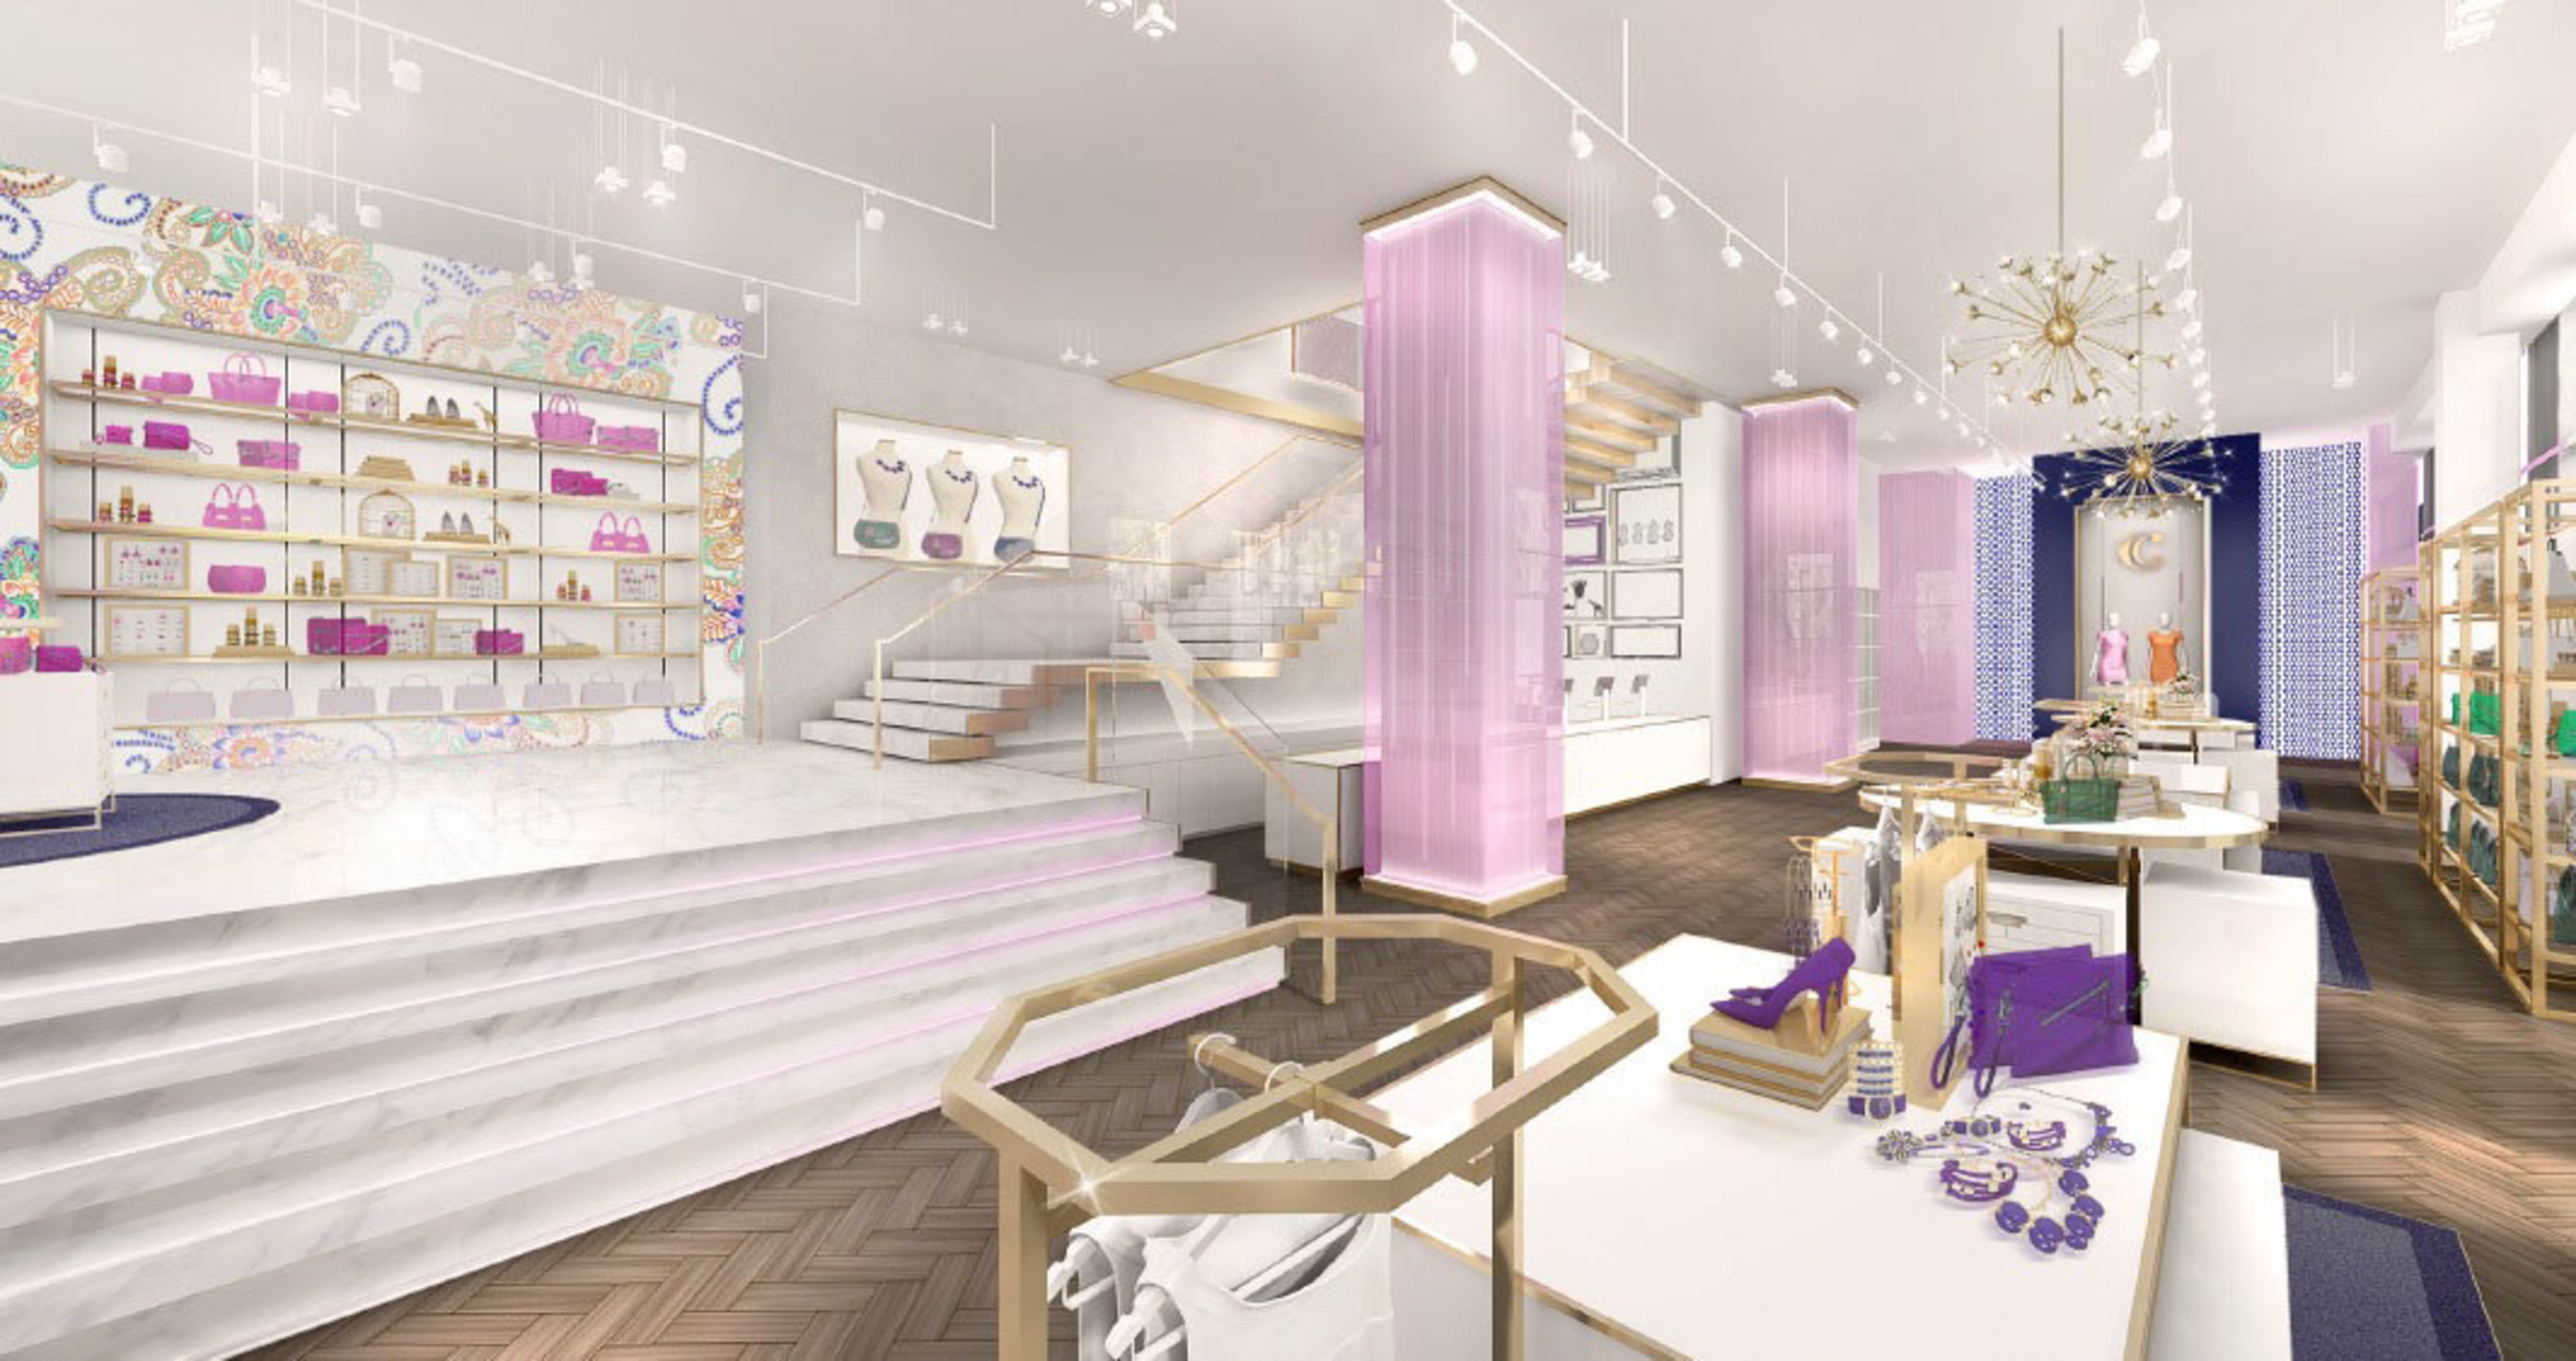 Interior rendering of Charming Charlie's New York Flagship scheduled to open in April 2015